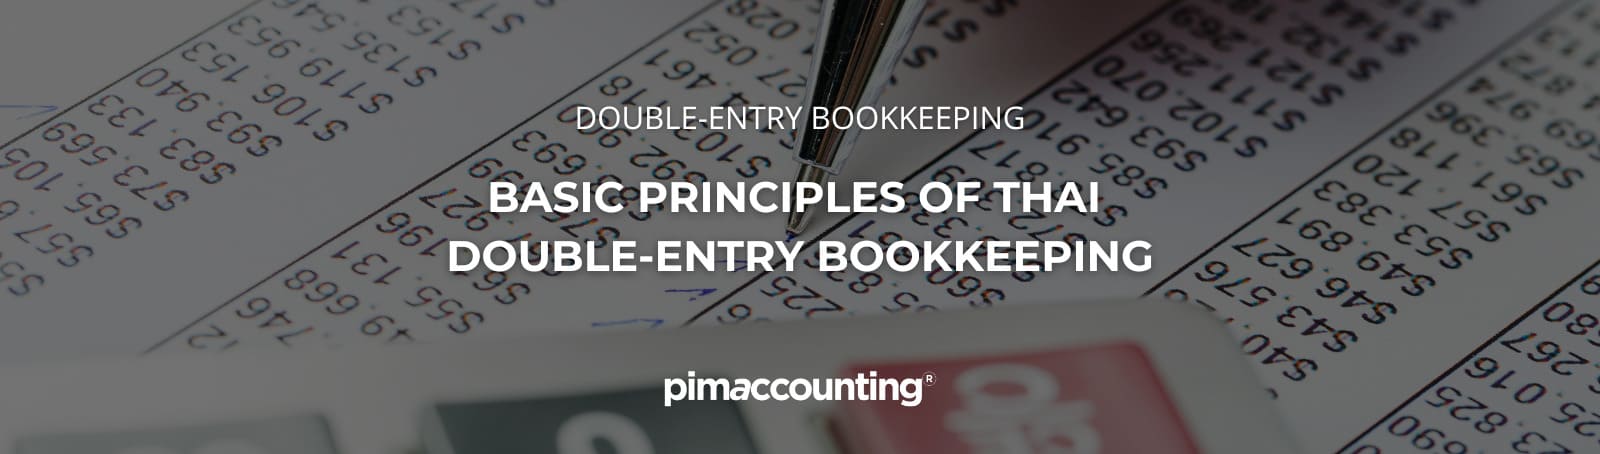 Basic Principles of Thai Double-entry Bookkeeping